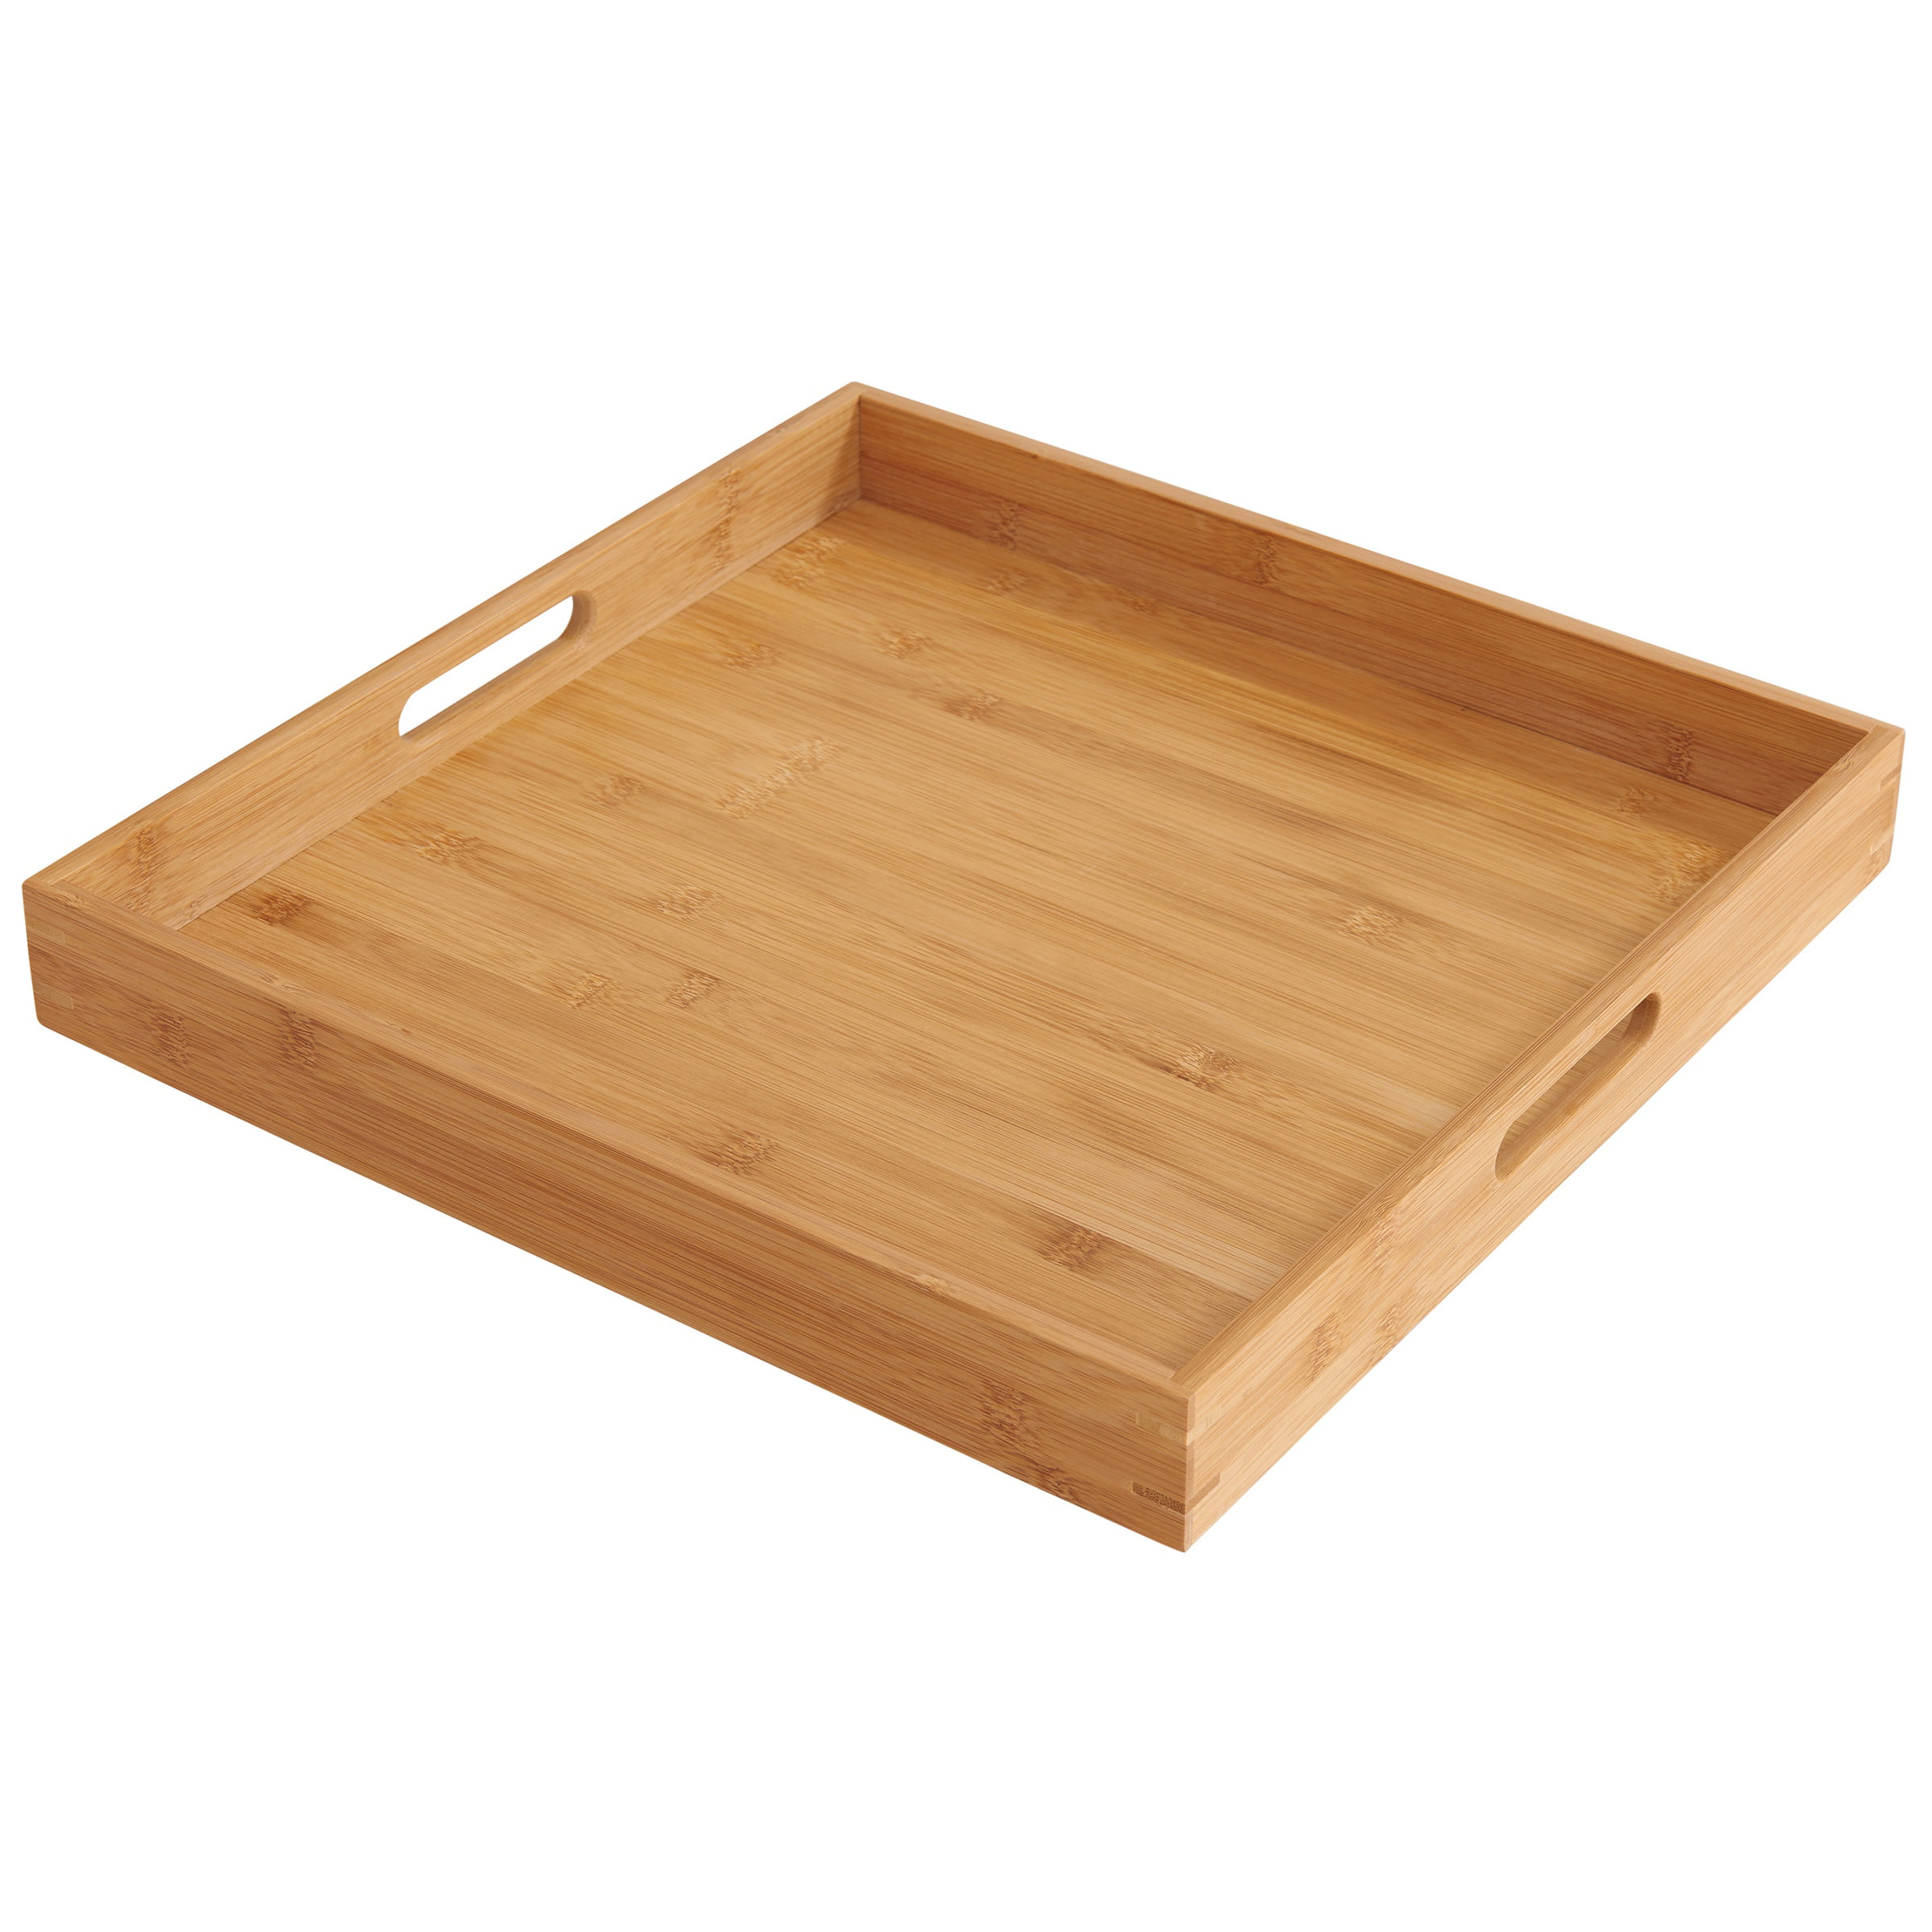 Details about   FOH Black Bamboo Serving Tray 19"L x 13"W x 1 1/2"H 